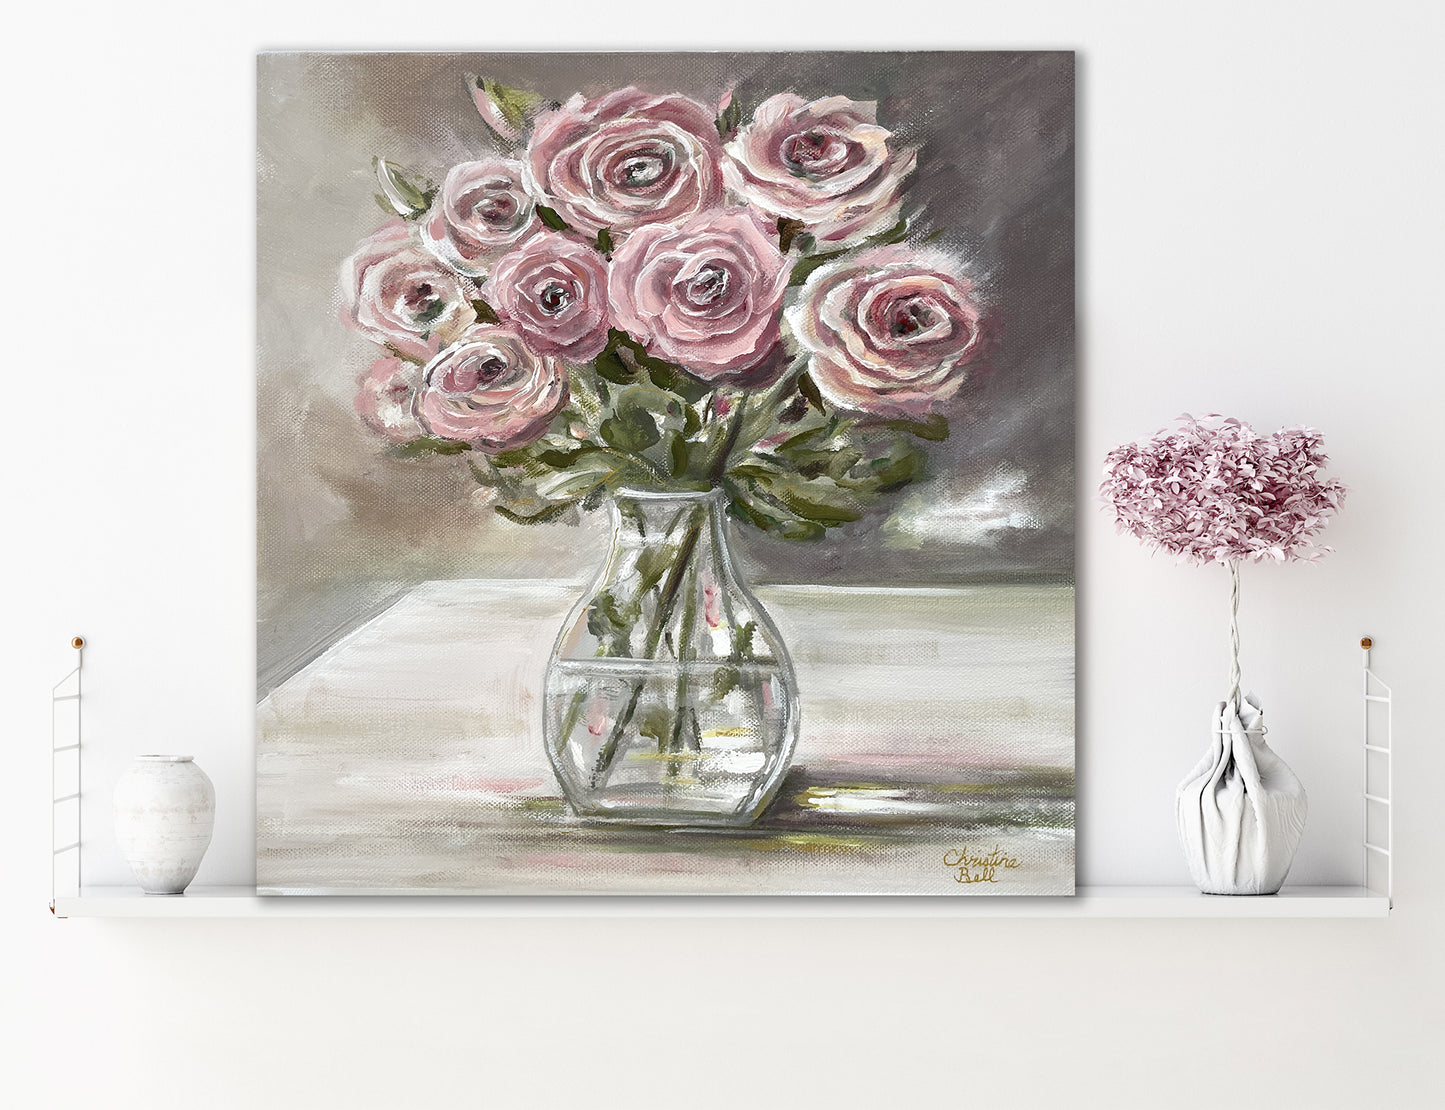 Original Fine Art Paintings Beautiful Artwork Small Canvas Oil Paintings on Paper Framed Landscapes Floral Flowers Still Life by Artist Christine Bell Elegant Wall Art Home Decor